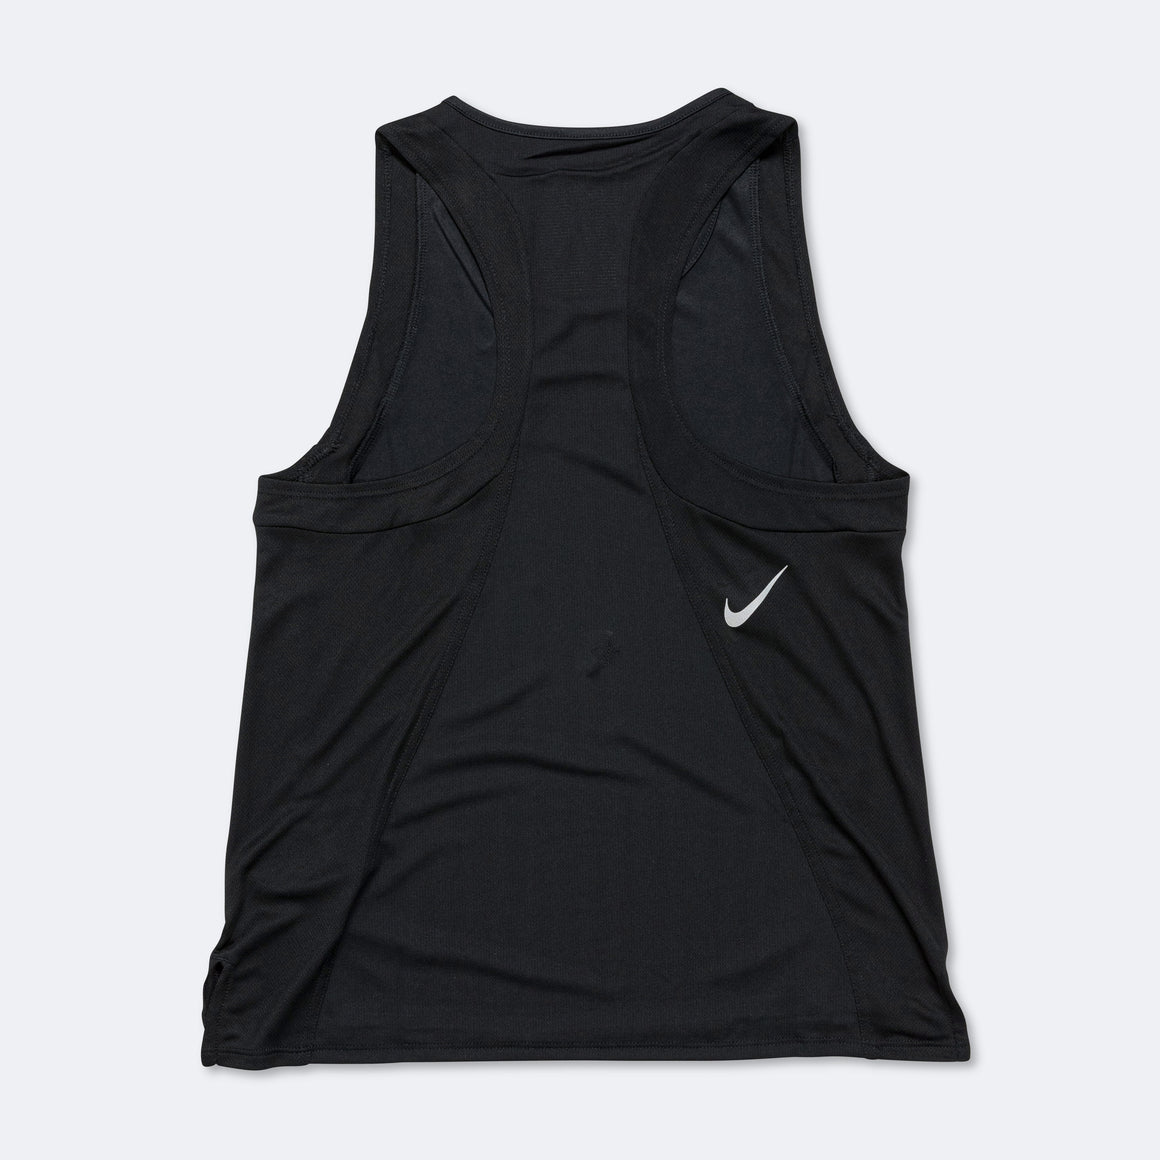 Nike - Womens Dri-Fit Fast Tank - Black/Reflective Silver - Up There Athletics